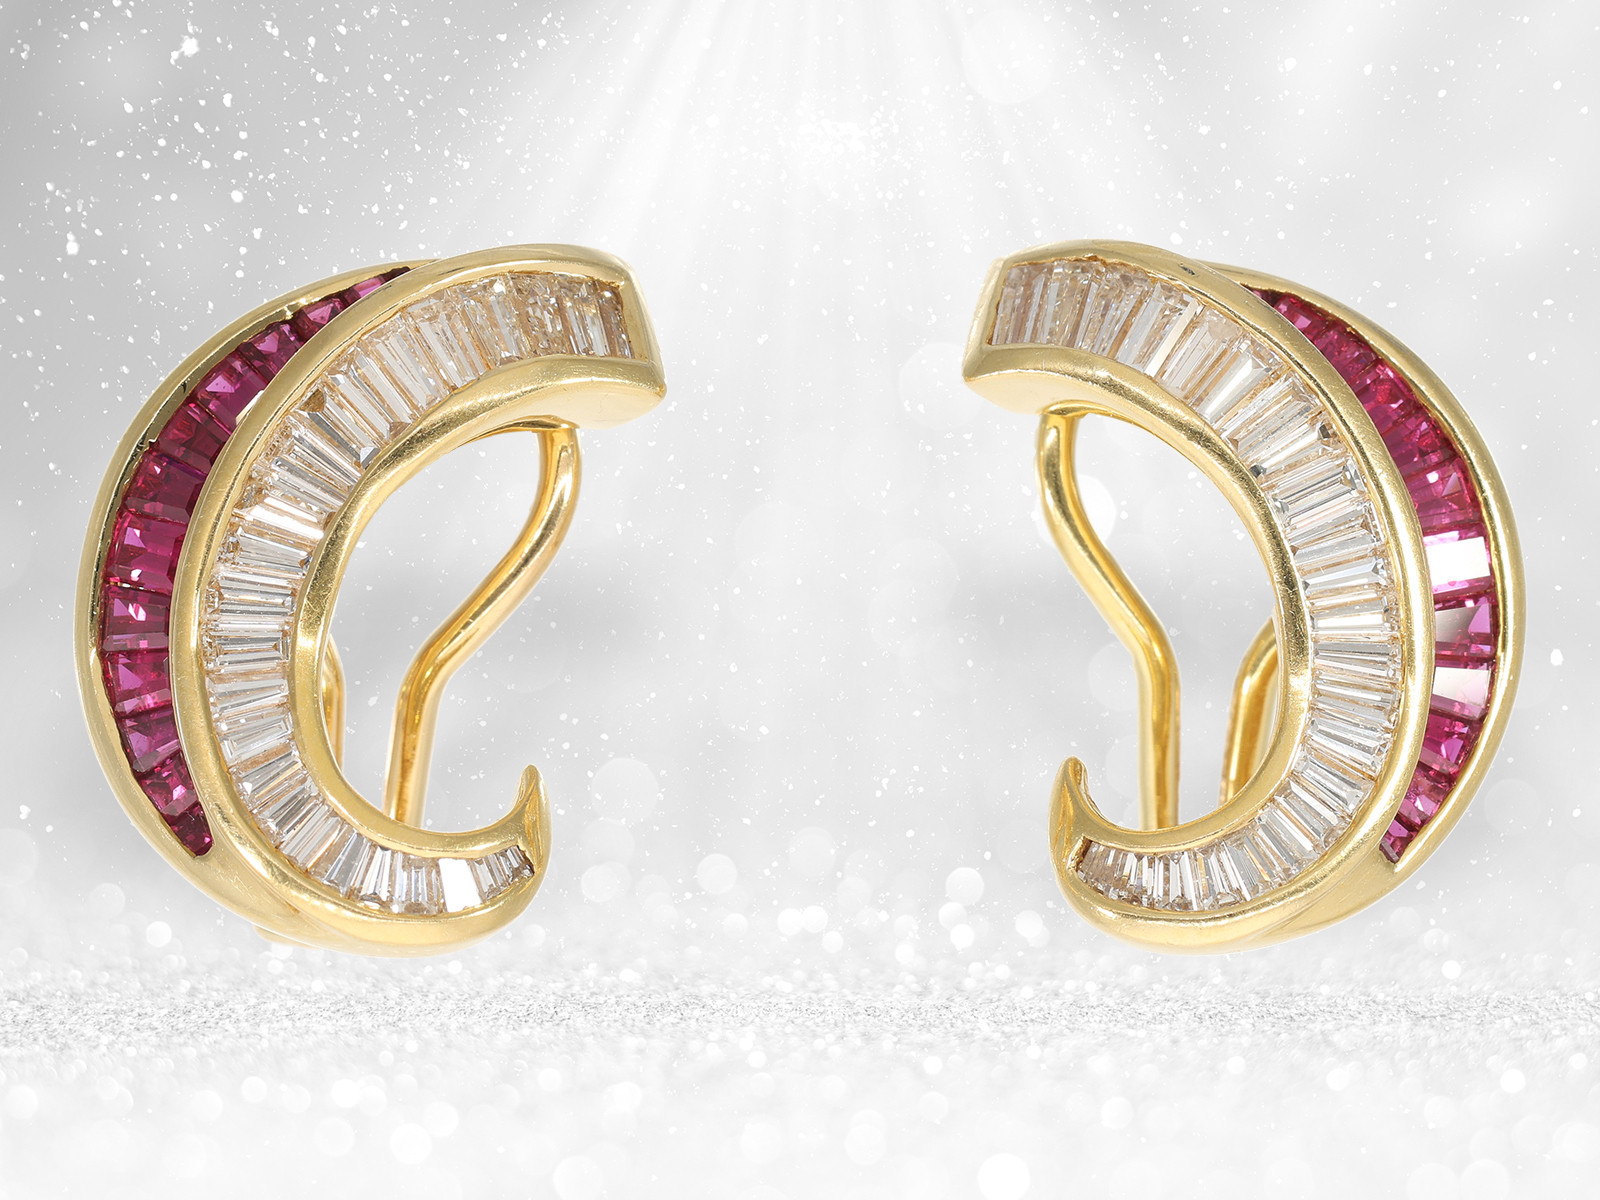 Earrings: highly refined goldsmith earrings with rubies and diamonds